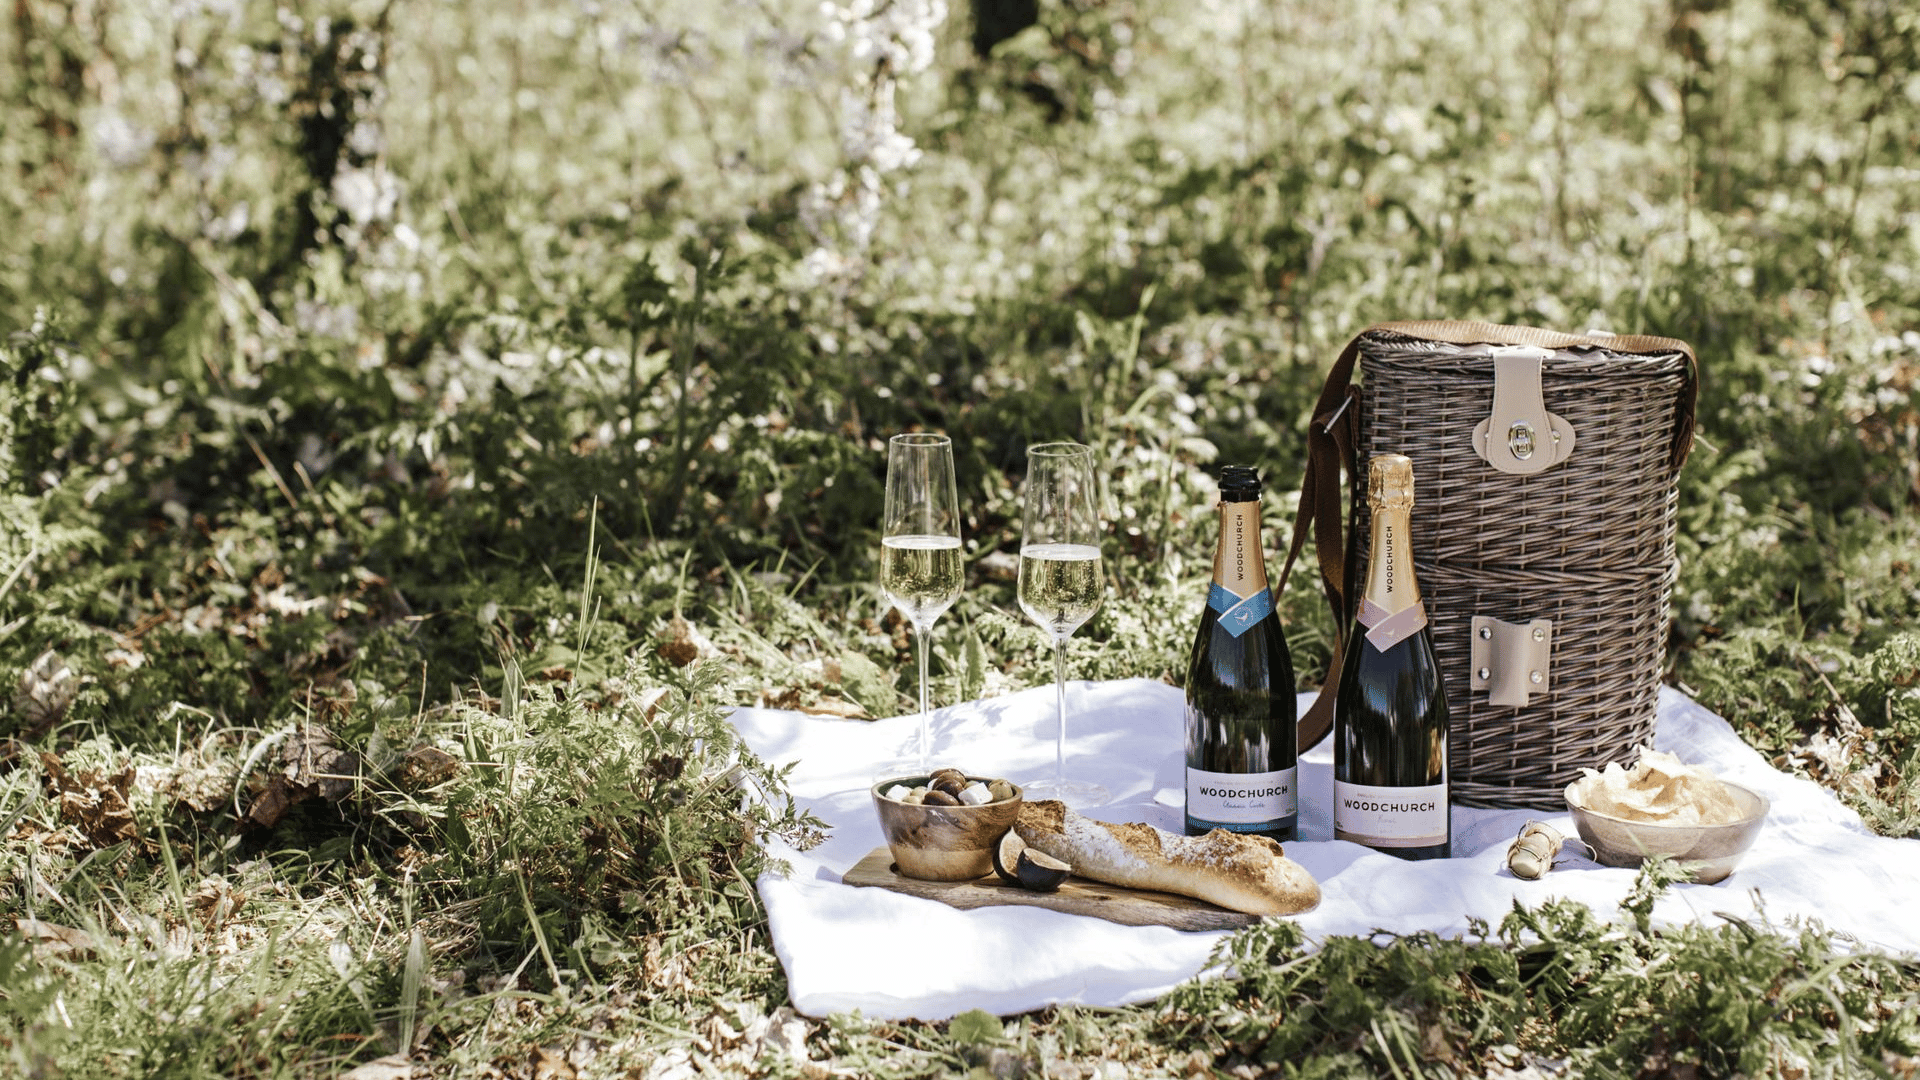 English Sparkling Wine Hamper and bread on display as a picnic